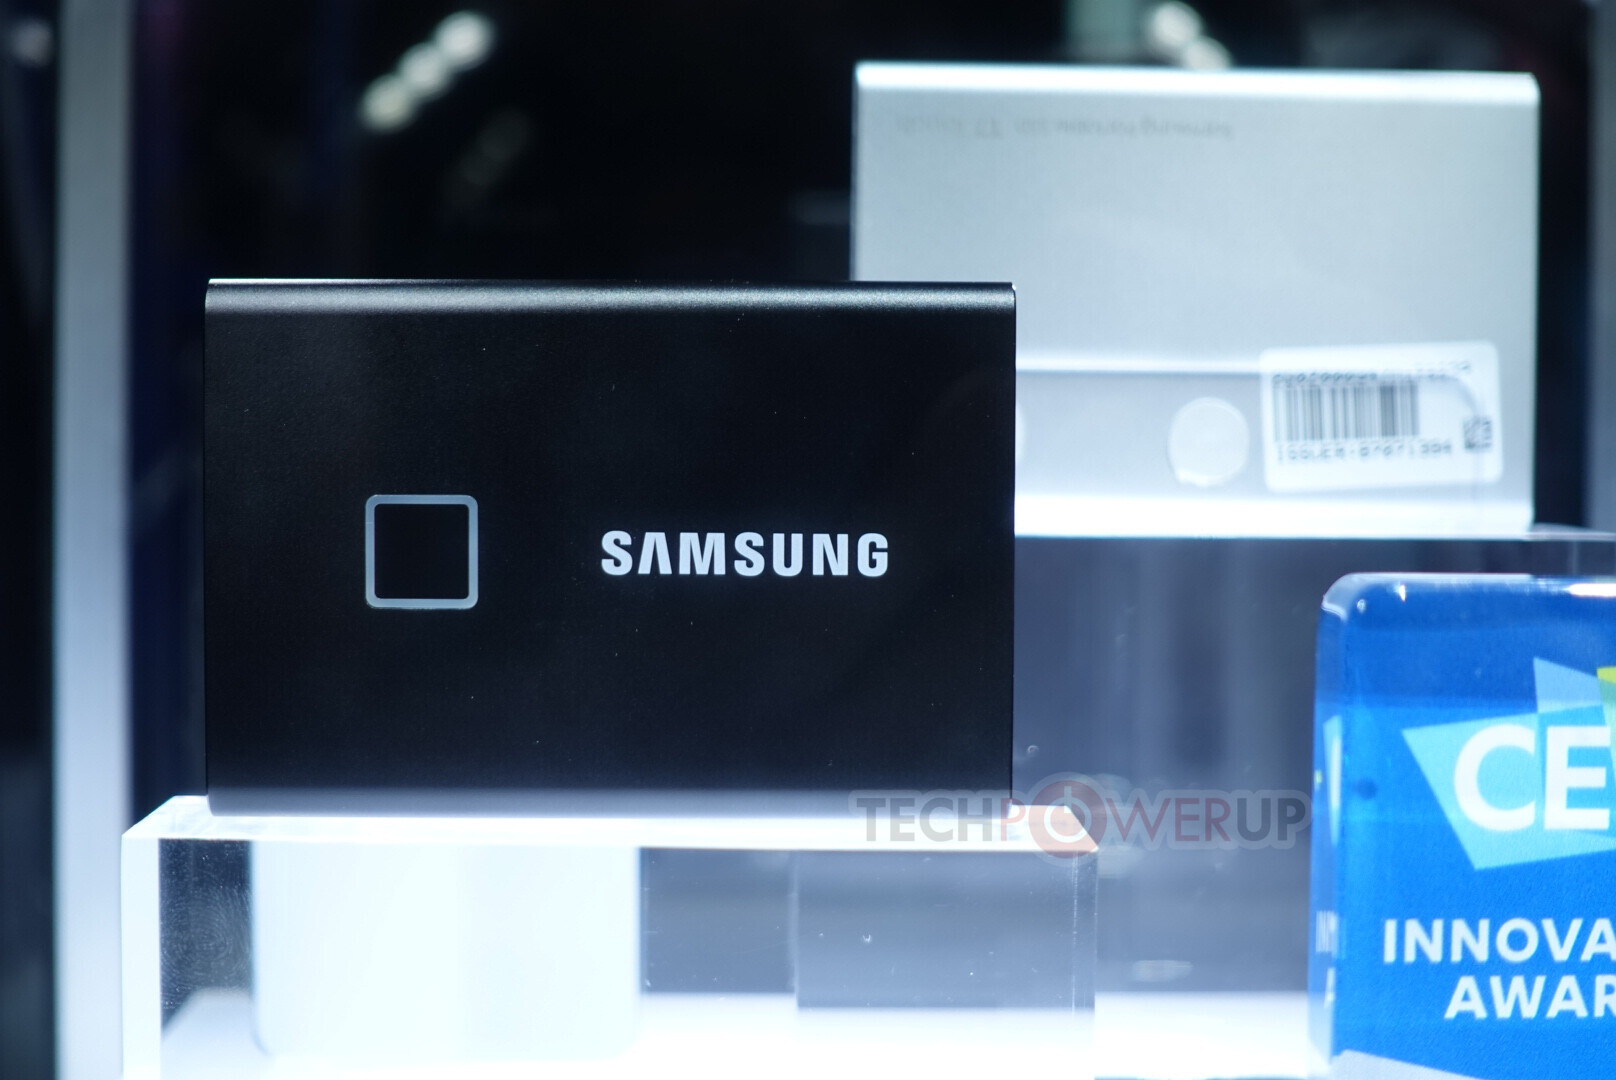 CES 2020: Samsung 980 PRO PCIe 4.0 SSD Makes An Appearance